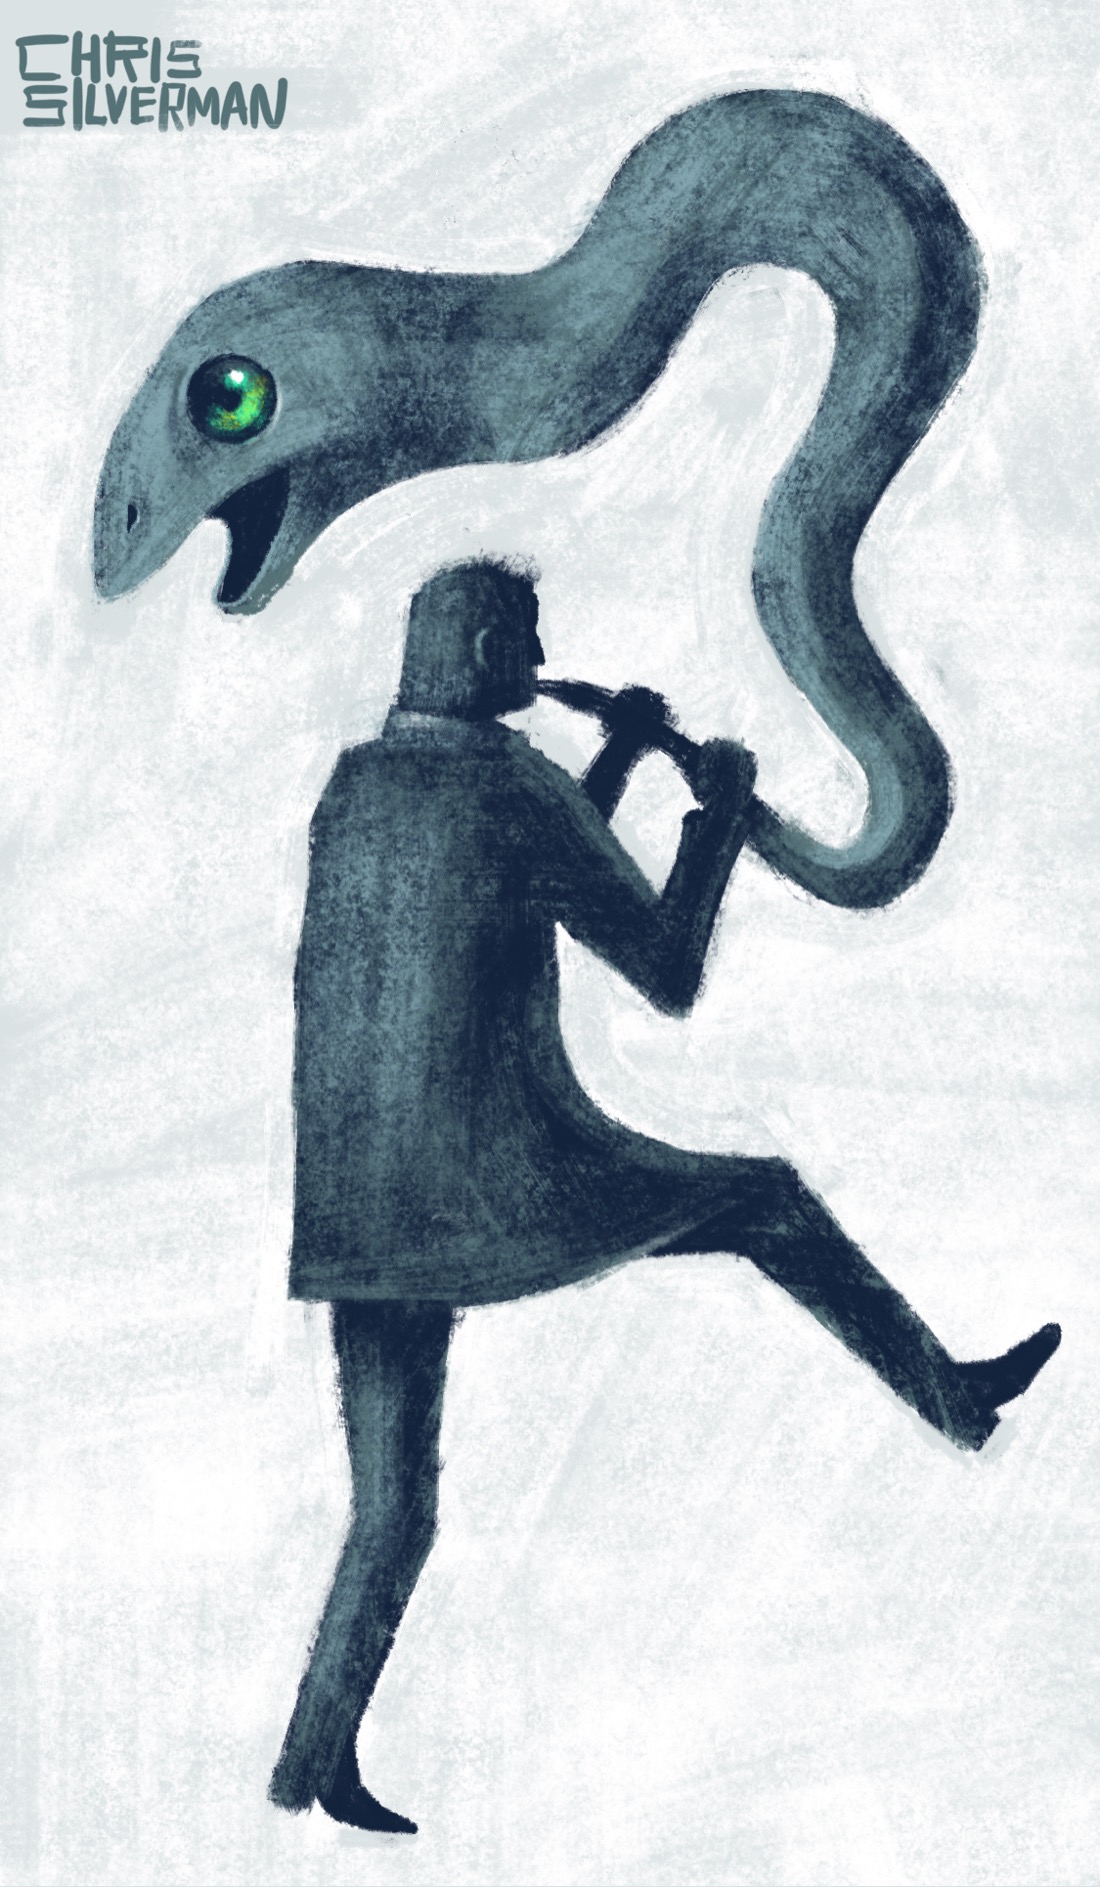 A person wearing a dark gray suit dances, playing an instrument. They are facing away from us, one leg lifted as though skipping or prancing. The instrument they are playing is a large snakelike creature with gray skin and large, iridescent green eyes. The creature's tail is in their mouth, and its large head is above and behind them, its mouth open.